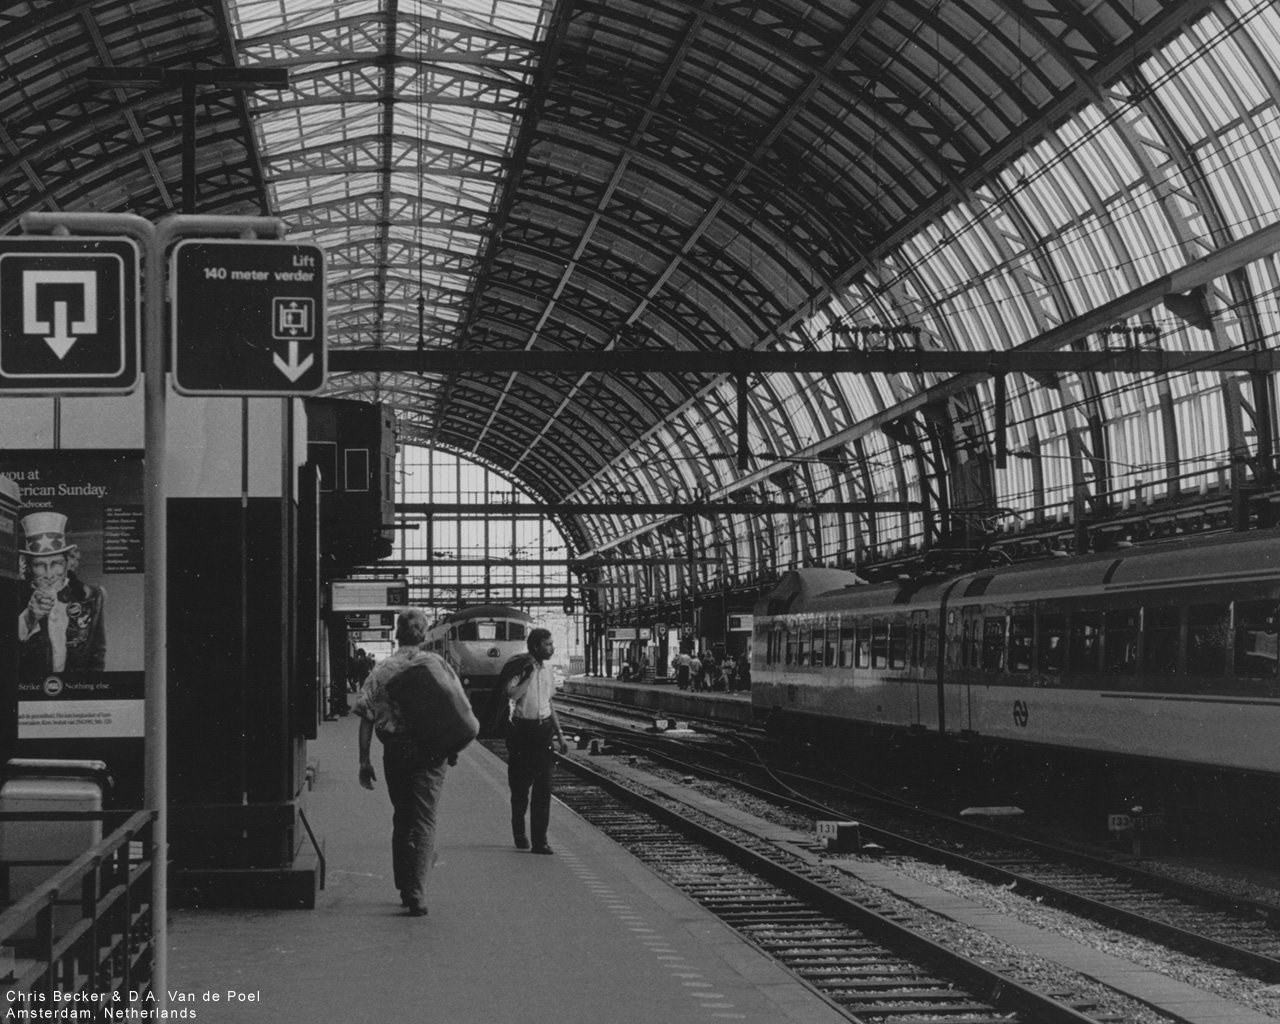 Download Hd Train Station Pc Wallpaper Id - Train Station And Man , HD Wallpaper & Backgrounds